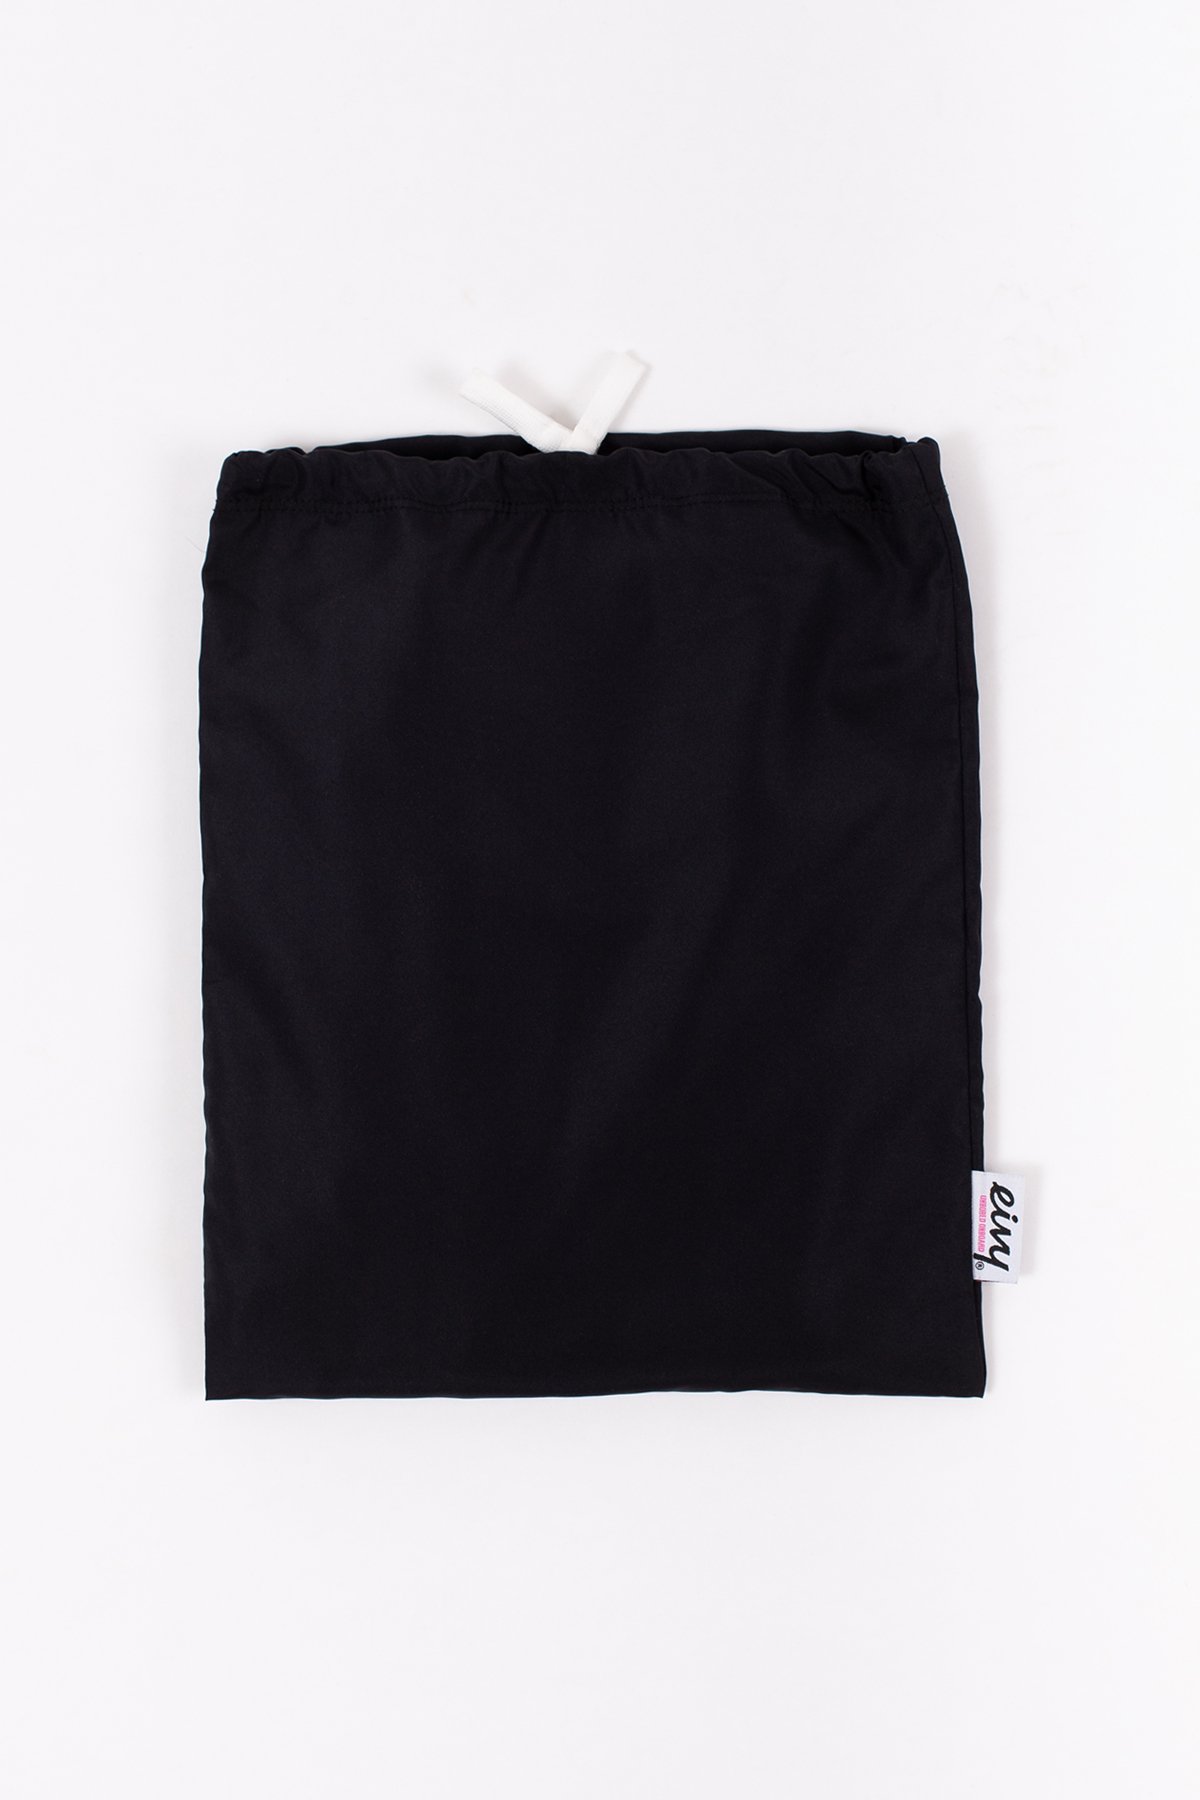 Base Layer | Icecold Top - Team Black